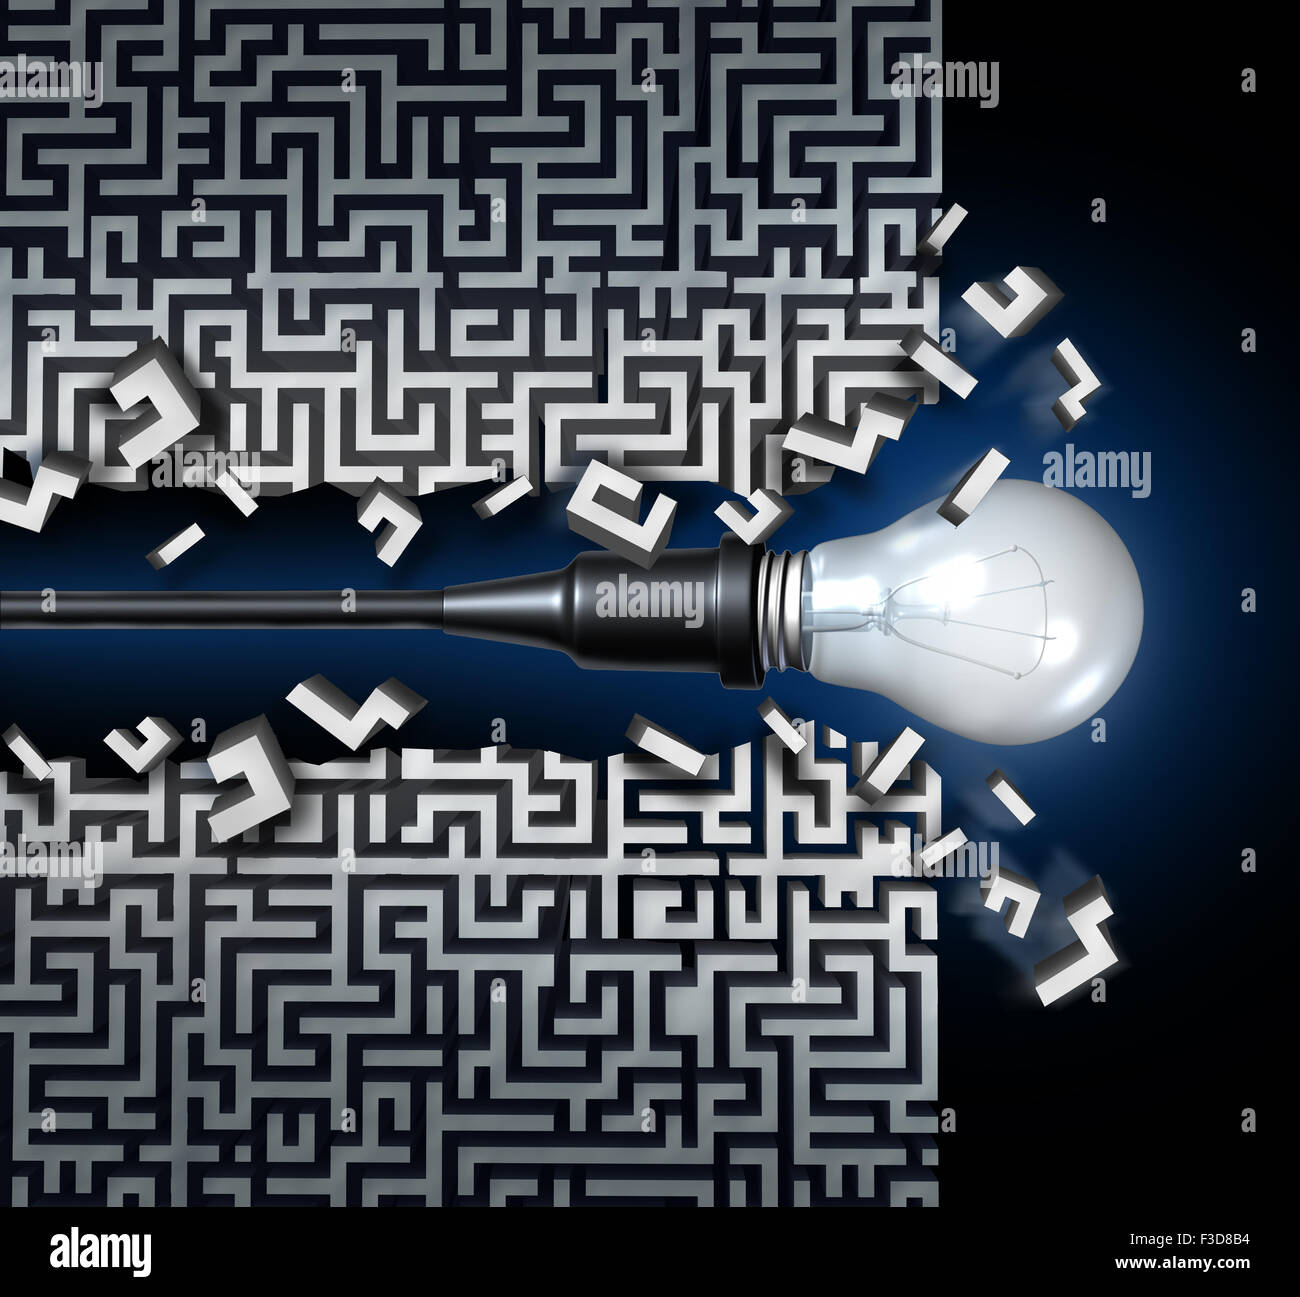 Innovative idea solution concept and new thinking business symbol as a light bulb breaking through a maze or labyrinth as an icon for innovation and invention. Stock Photo